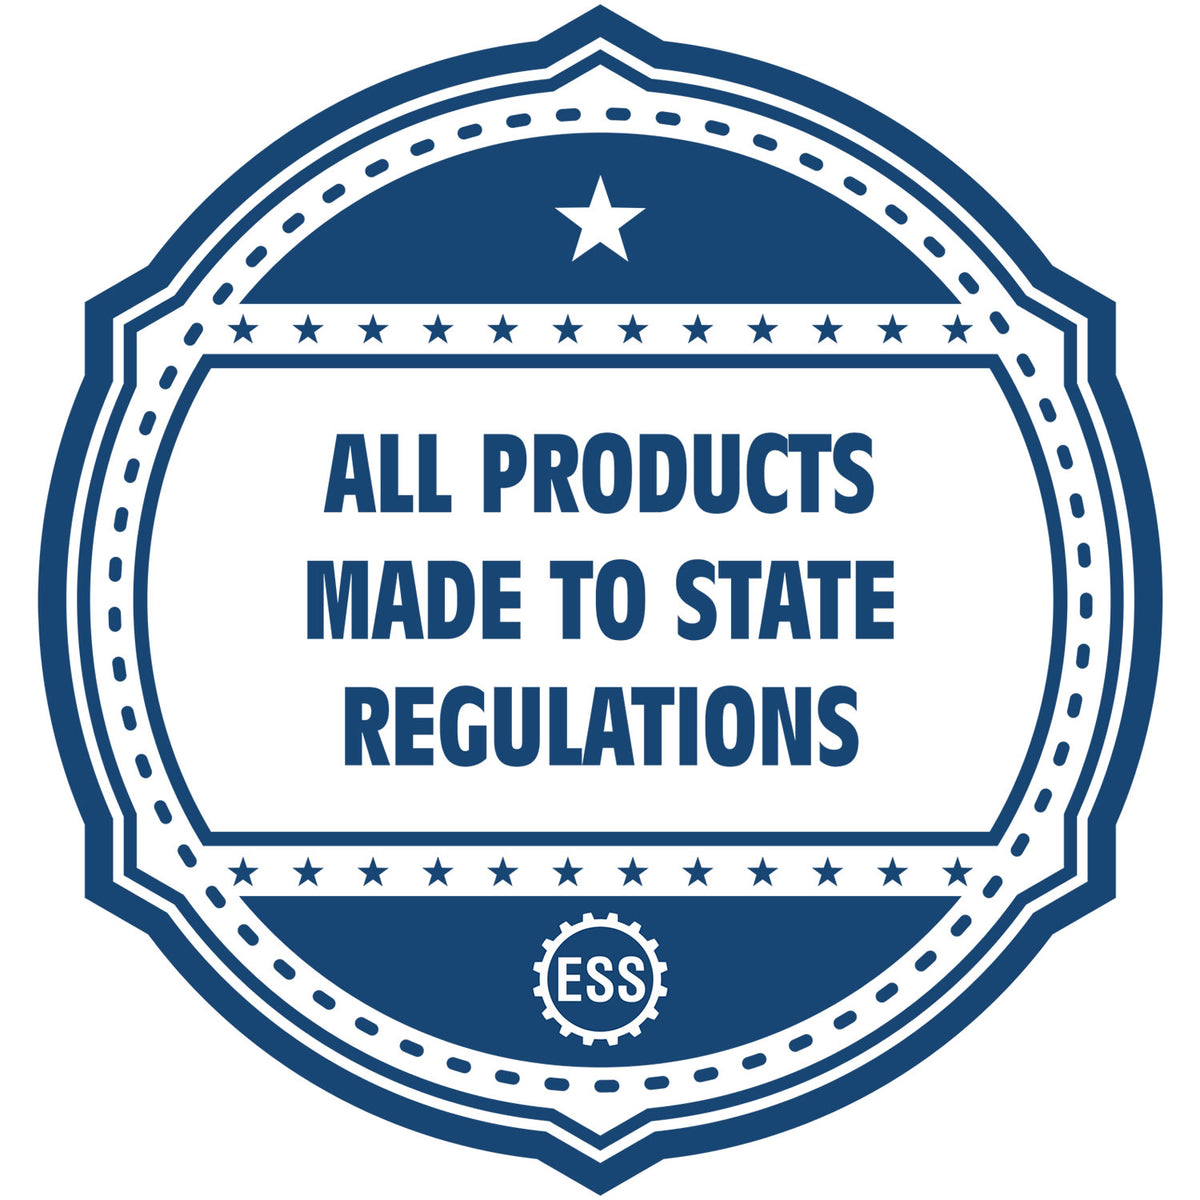 A blue icon or badge for the Hybrid Tennessee Engineer Seal showing that this product is made in compliance with state regulations.